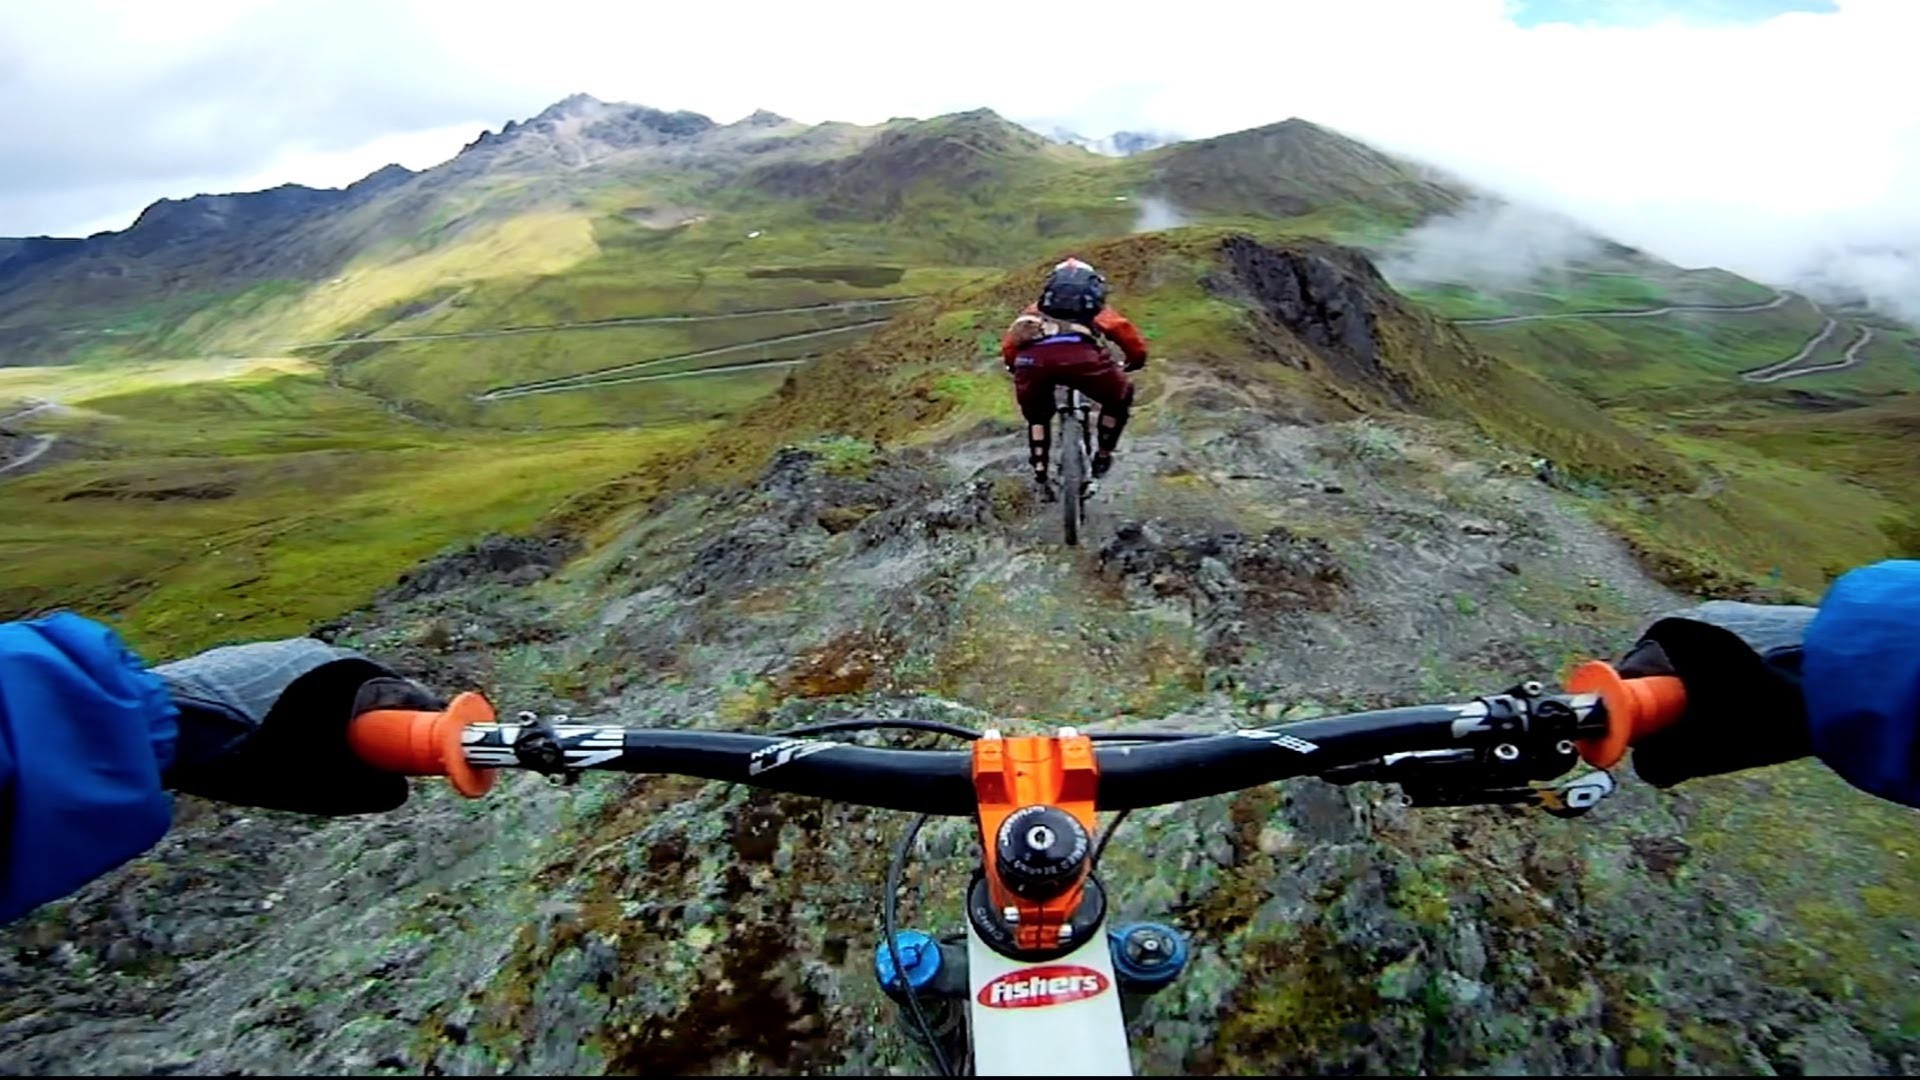 1920x1080 The 15 Most Viewed Mountain Bike Videos on YouTube -.